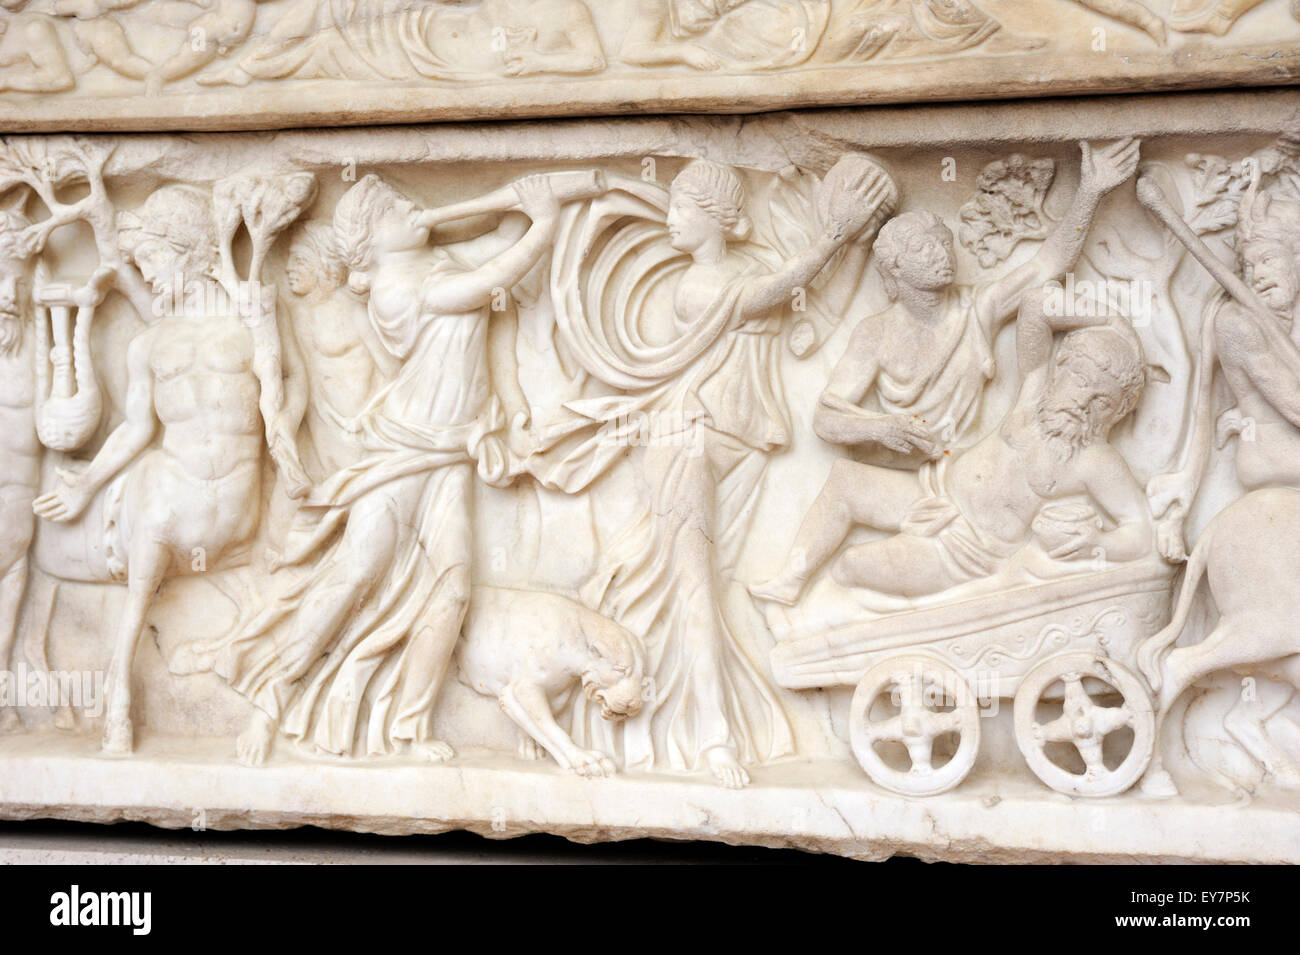 Italy, Rome, Terme di Diocleziano, Museo Nazionale Romano, National Roman Museum, roman sarcophagus bas relief Stock Photo